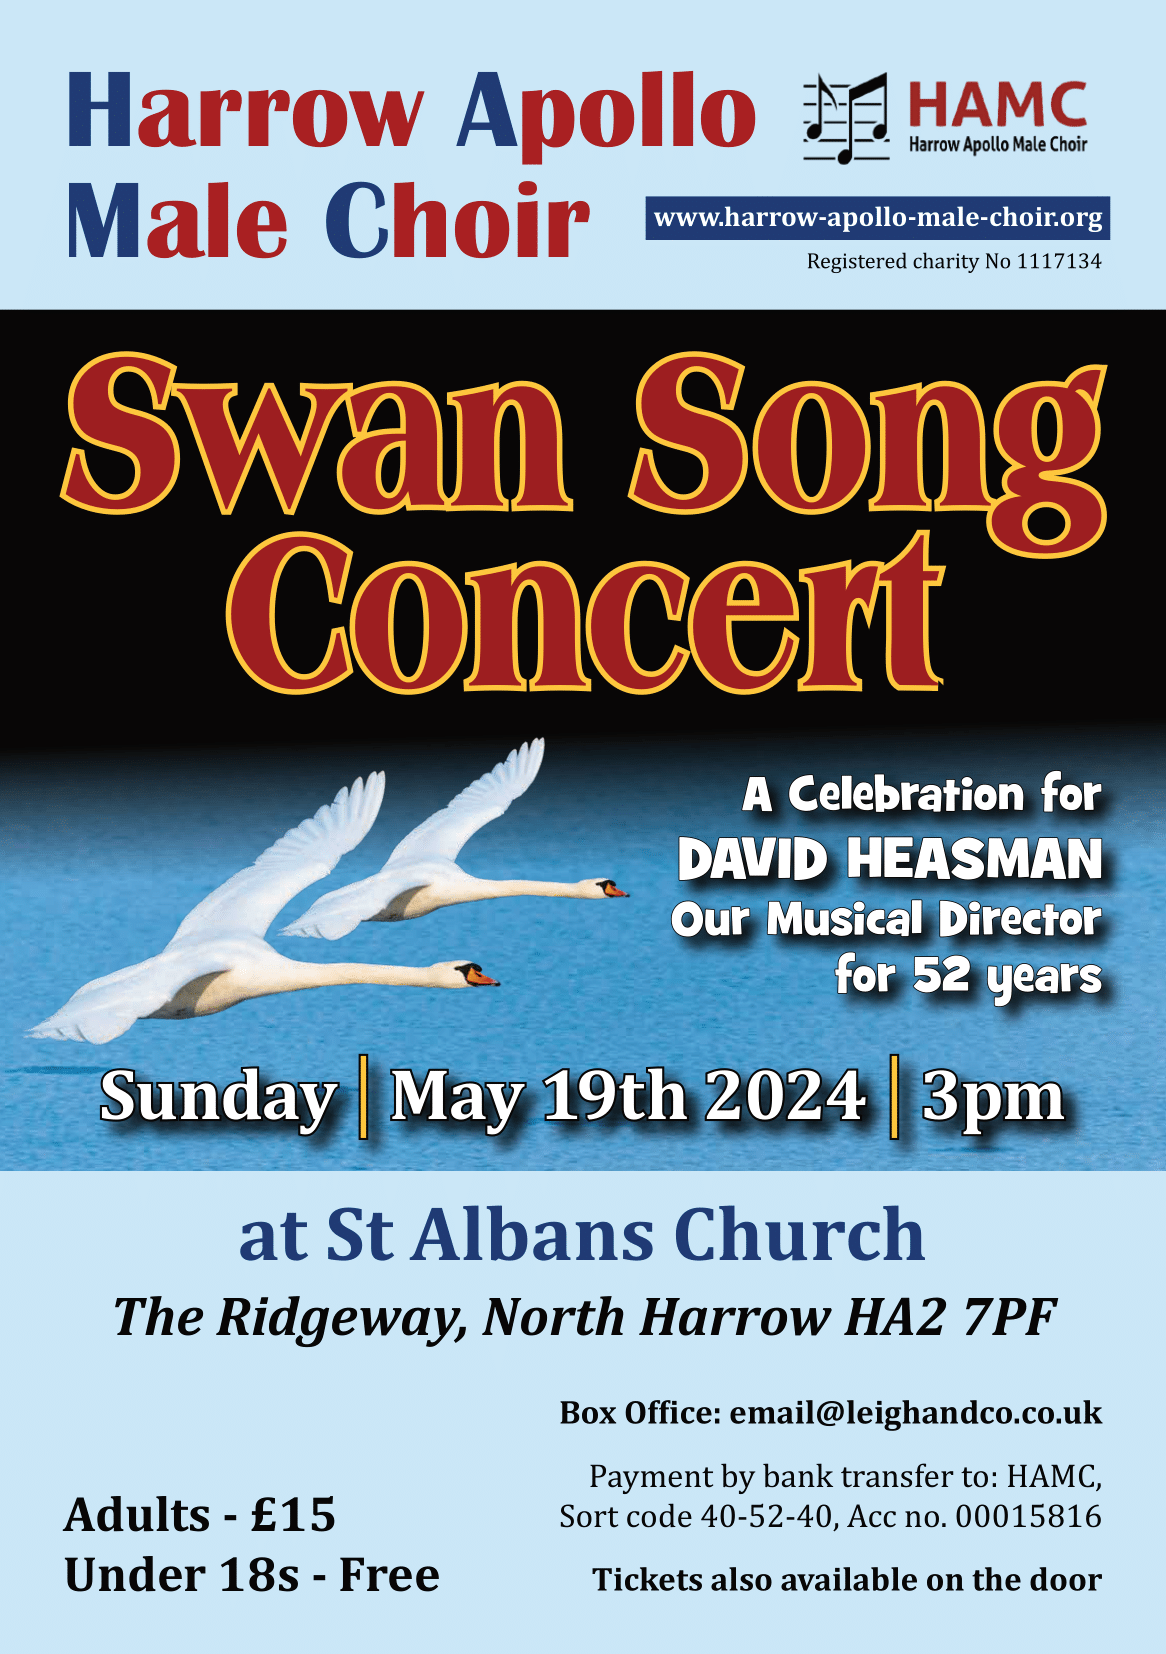 Swan Song Concert 19th May 2024 3pm. Box office email: michael@leighandco.co.uk